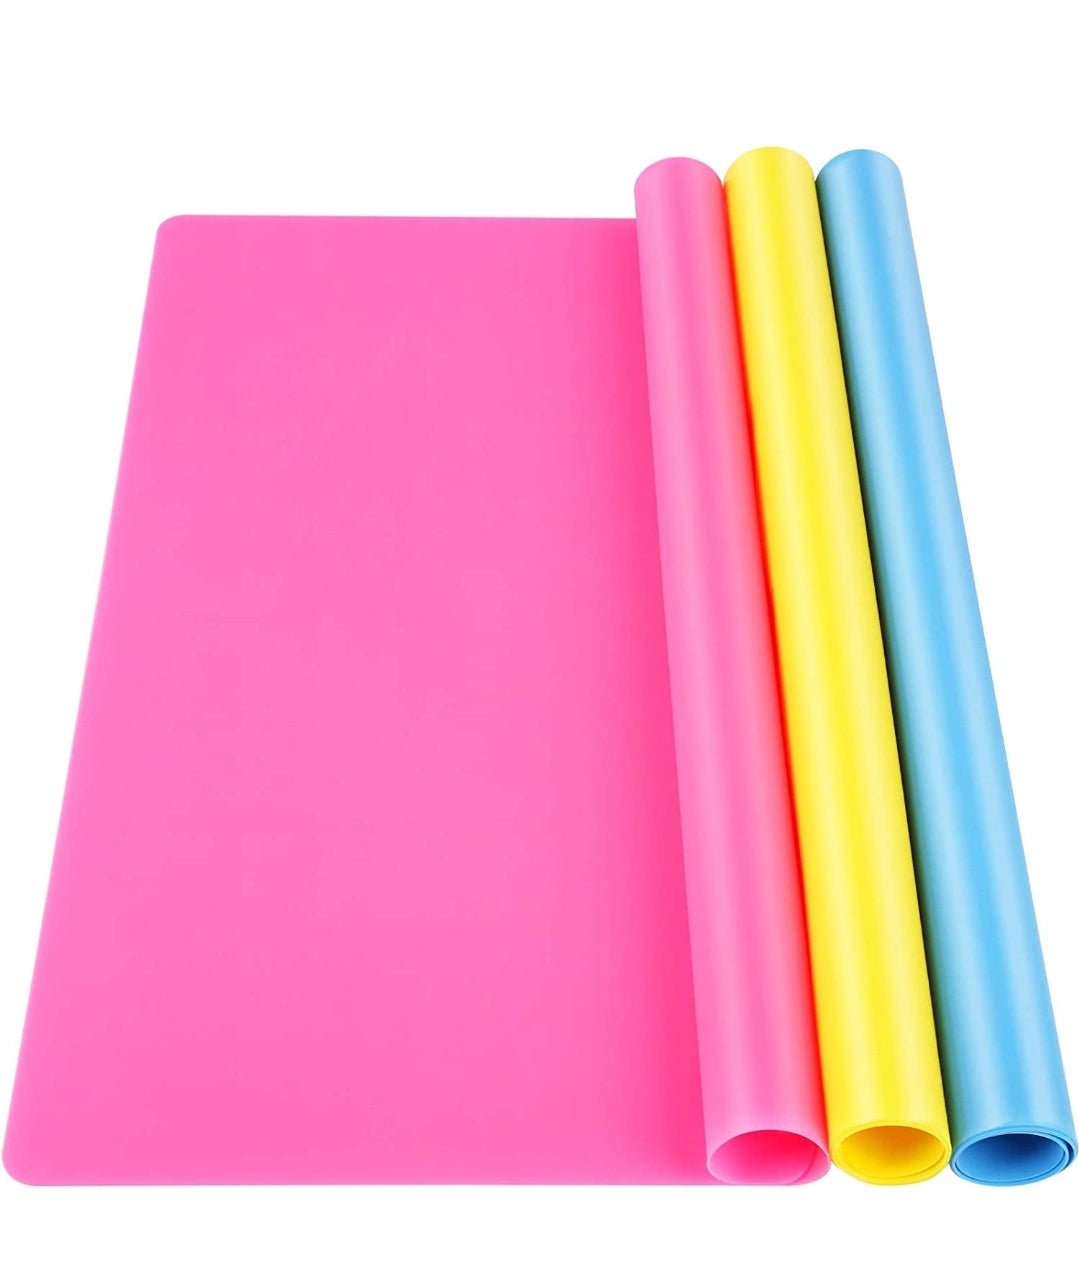 Smooth Silicone Mat